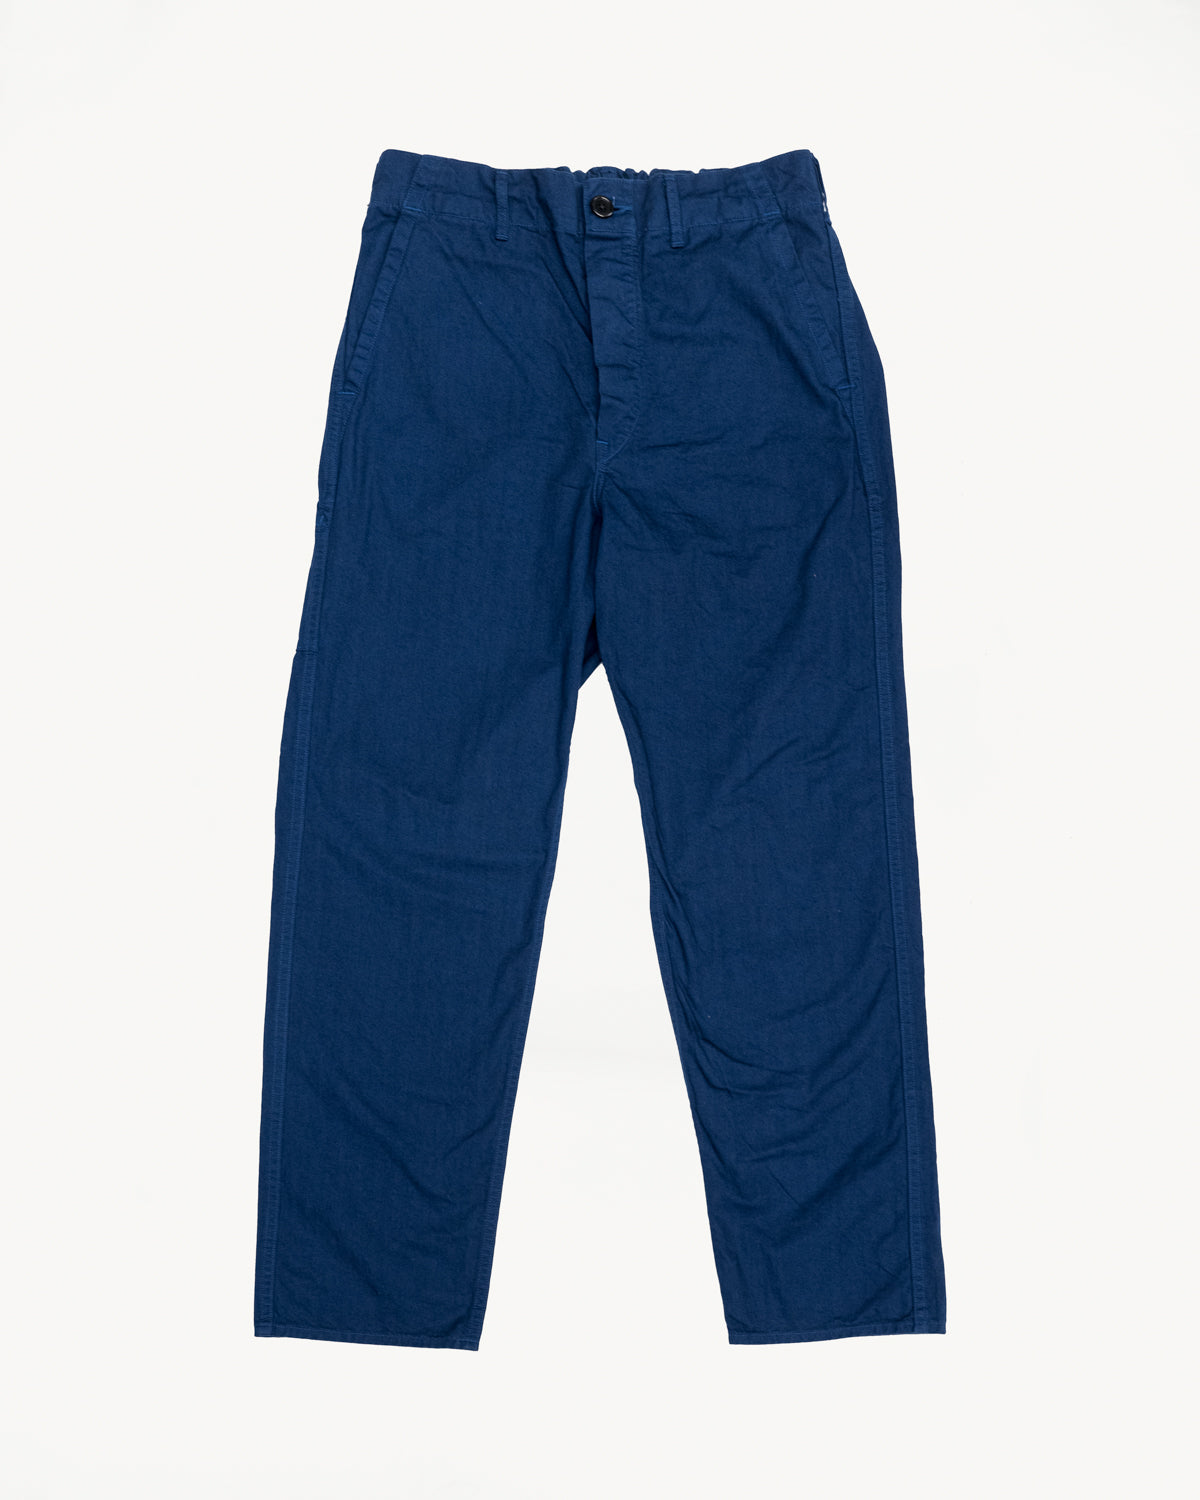 03-5000-02 - French Work Pant - Navy